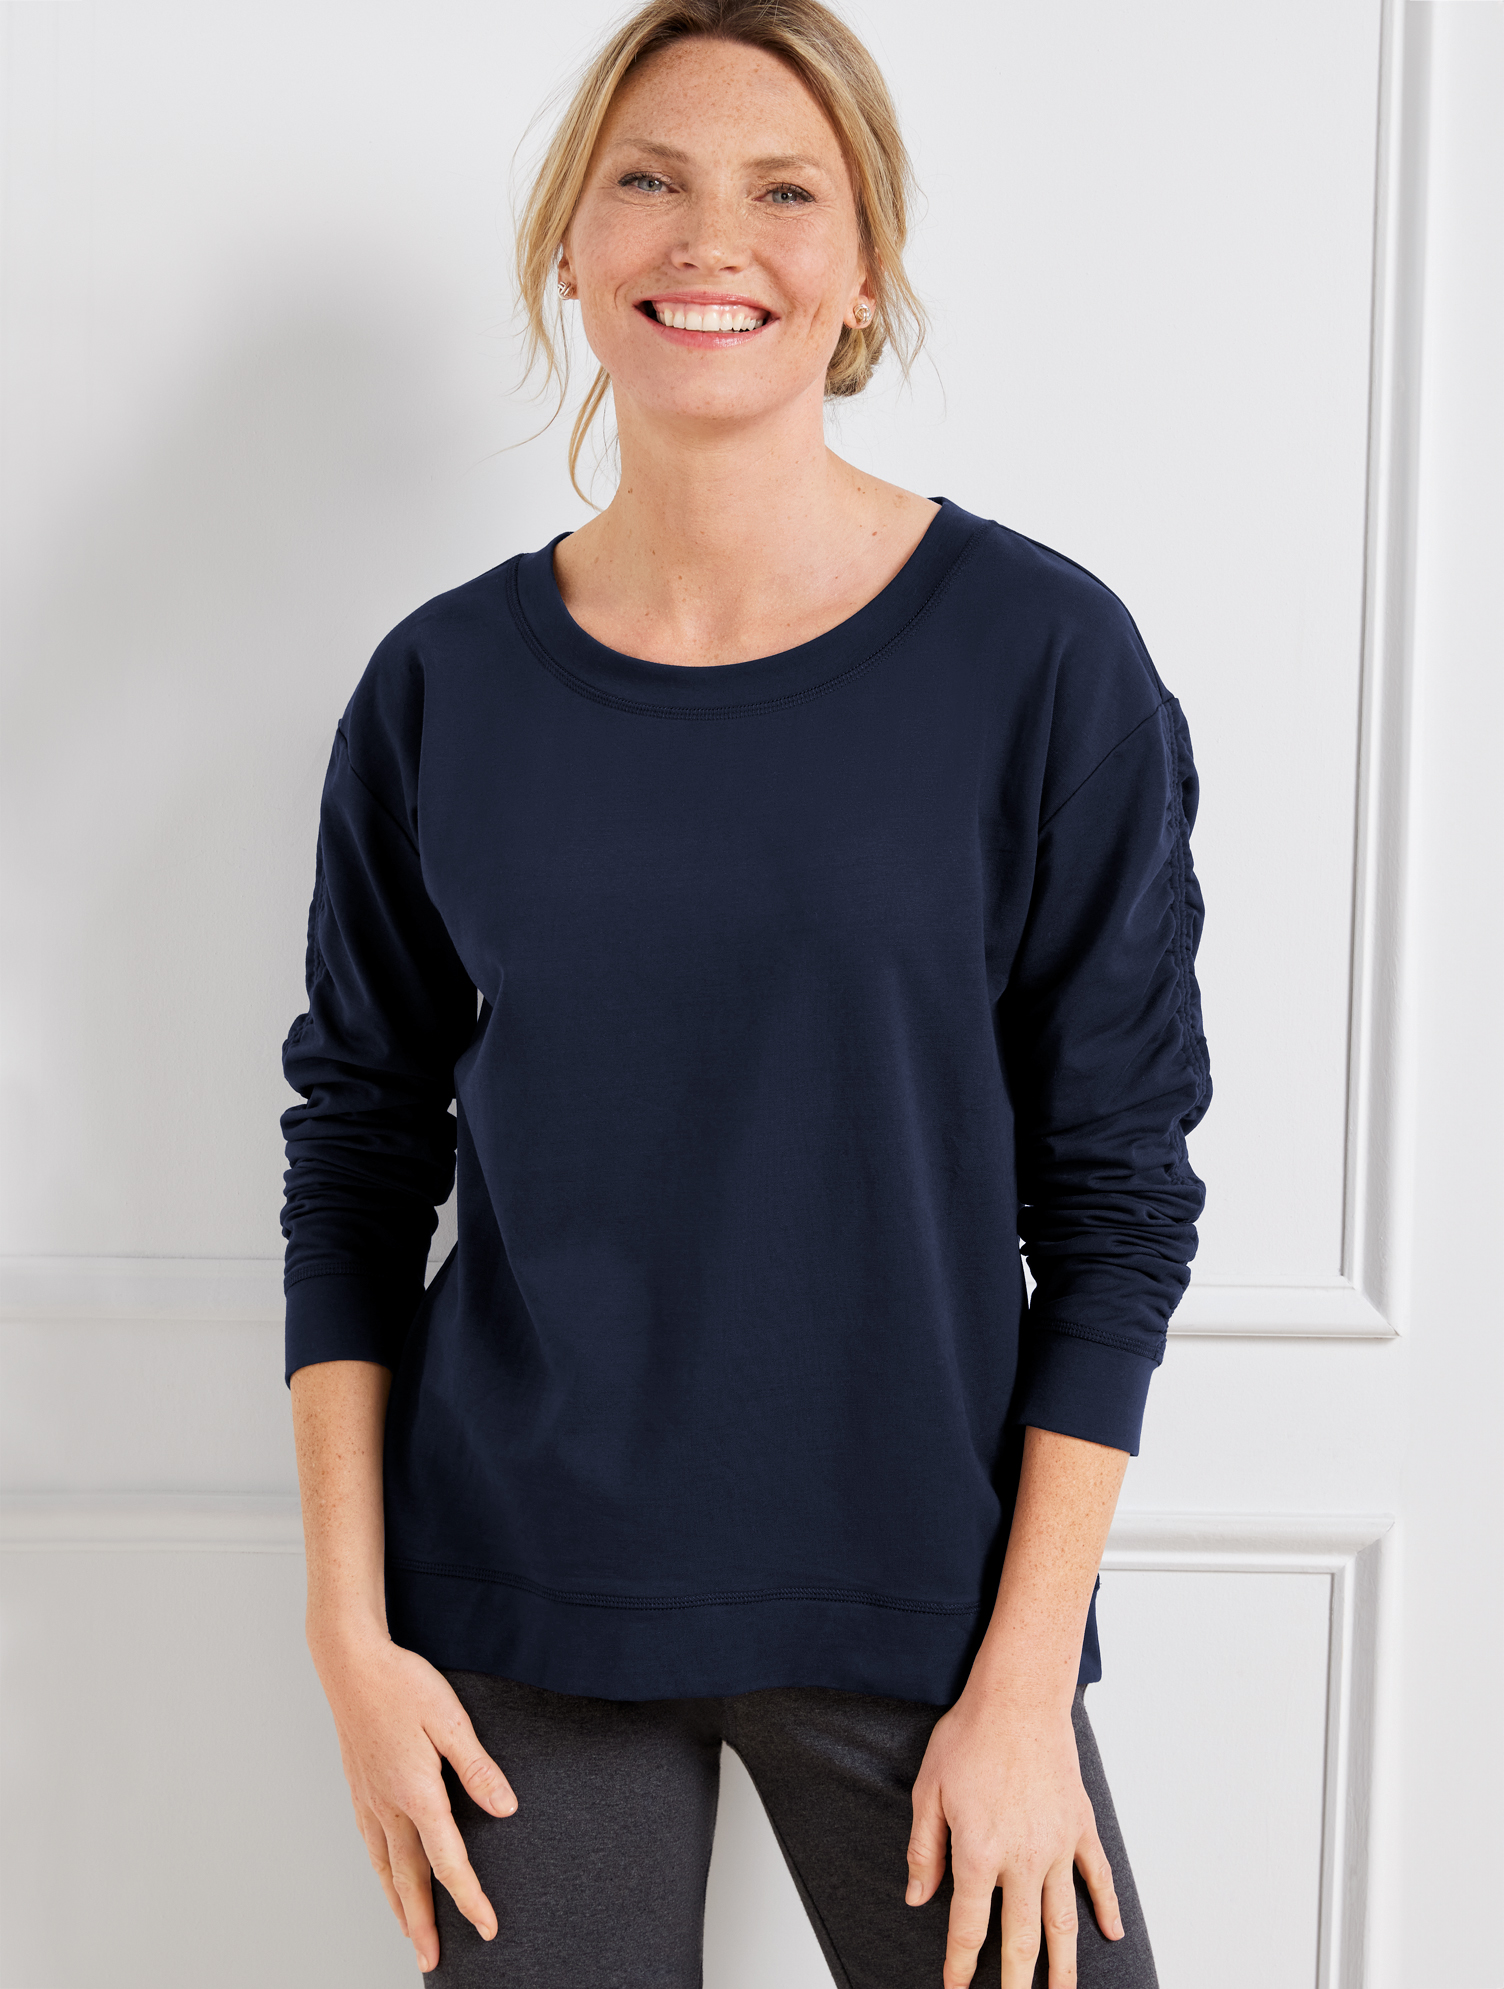 Talbots Ruched Sleeve Pullover Sweater - Blue - Medium